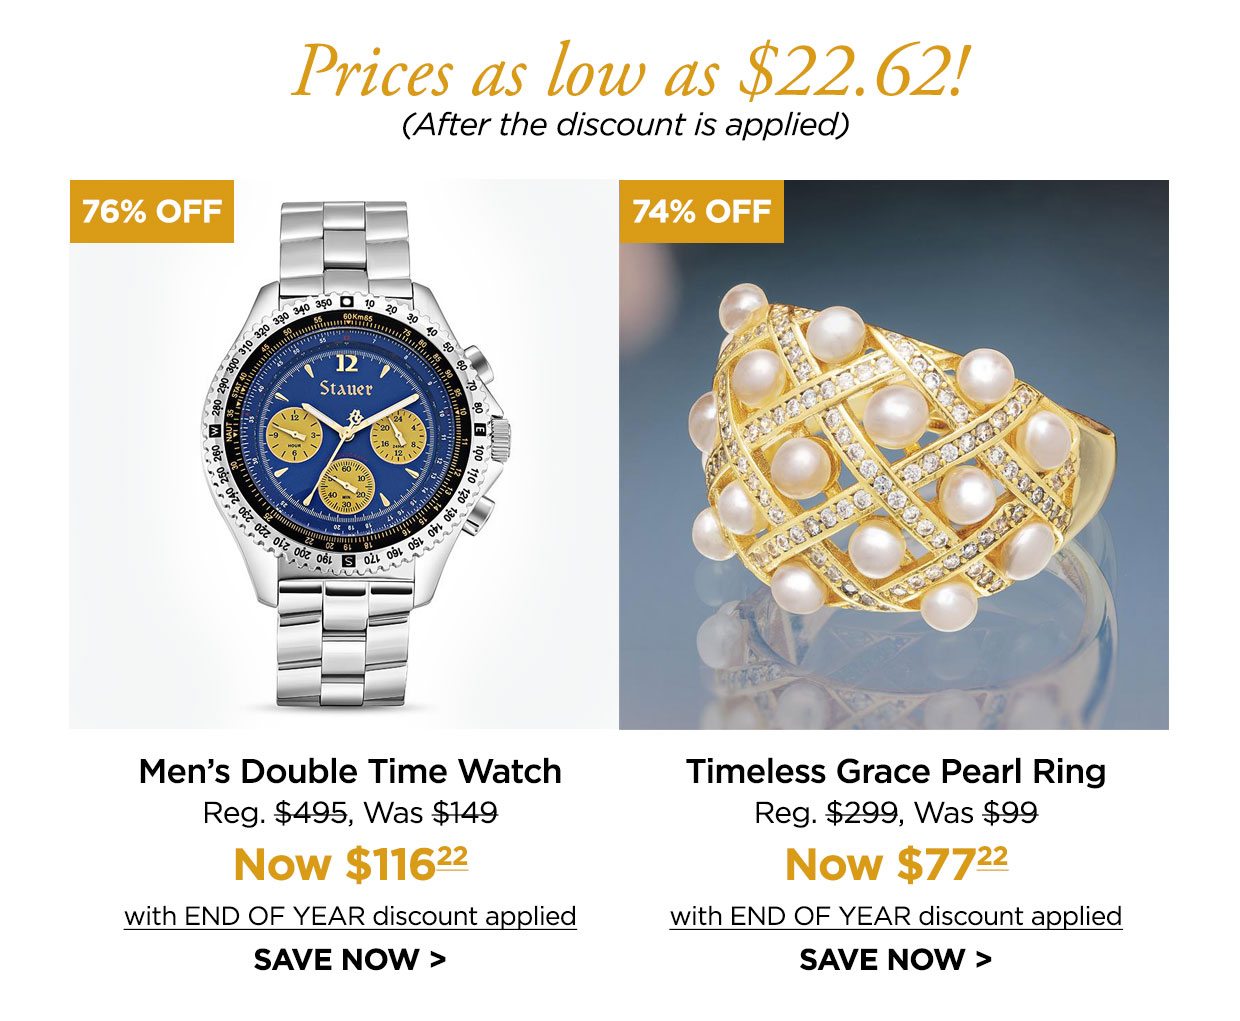 Prices as low as $22.62! (After the discount is applied). 76% off. Men's Double Time Watch Reg. $495, Was $149, Now $116.22 with END OF YEAR discount applied. SAVE NOW. 74% off. Timeless Grace Pearl Ring Reg. $299, Was $99, Now $77.22 with END OF YEAR discount applied. SAVE NOW